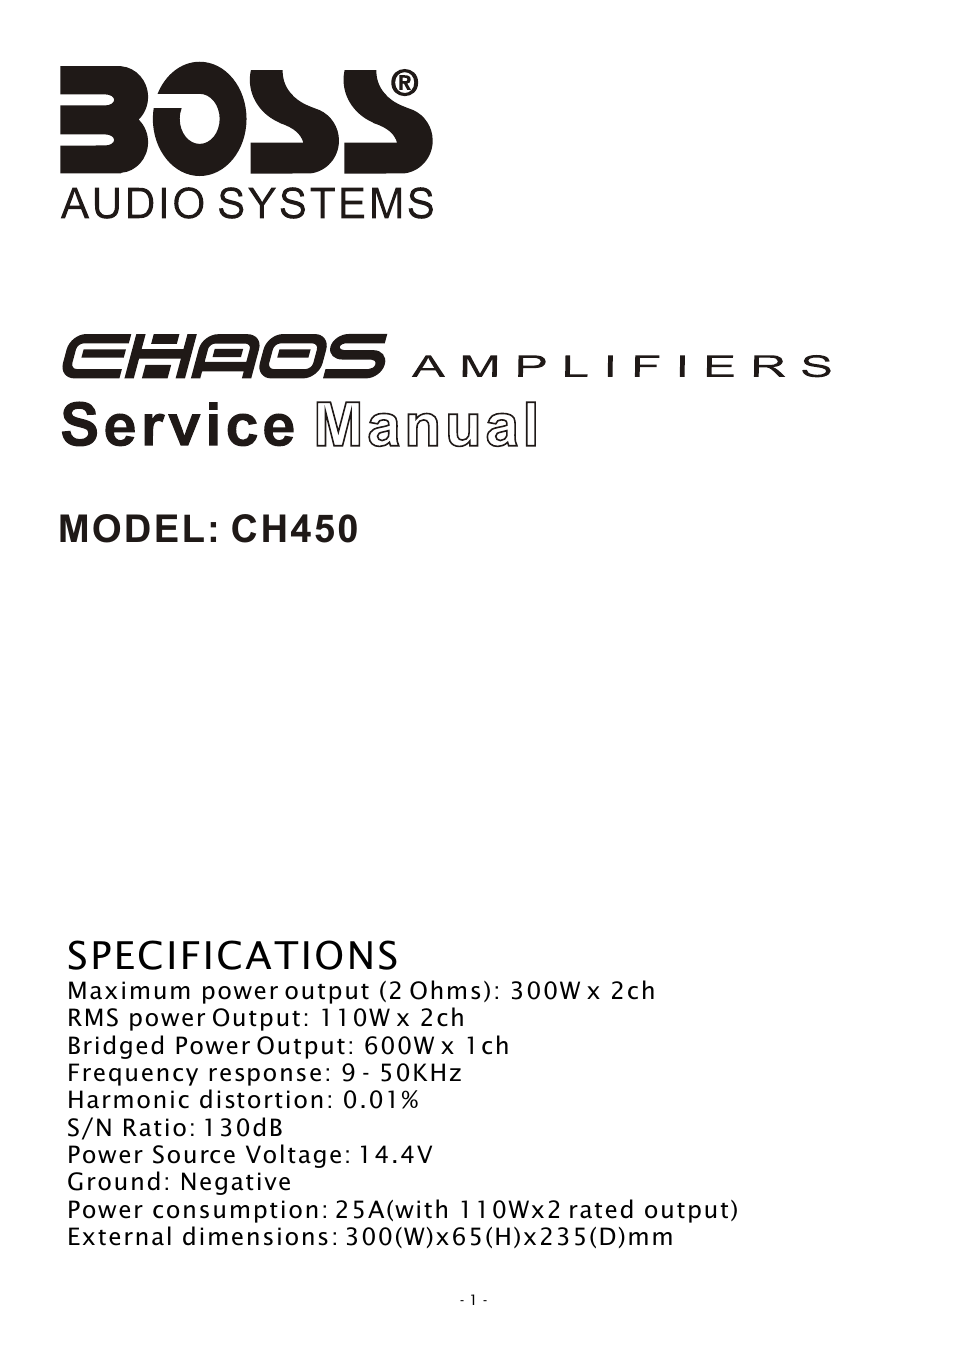 CHAOS AMPLIFIERS CH450